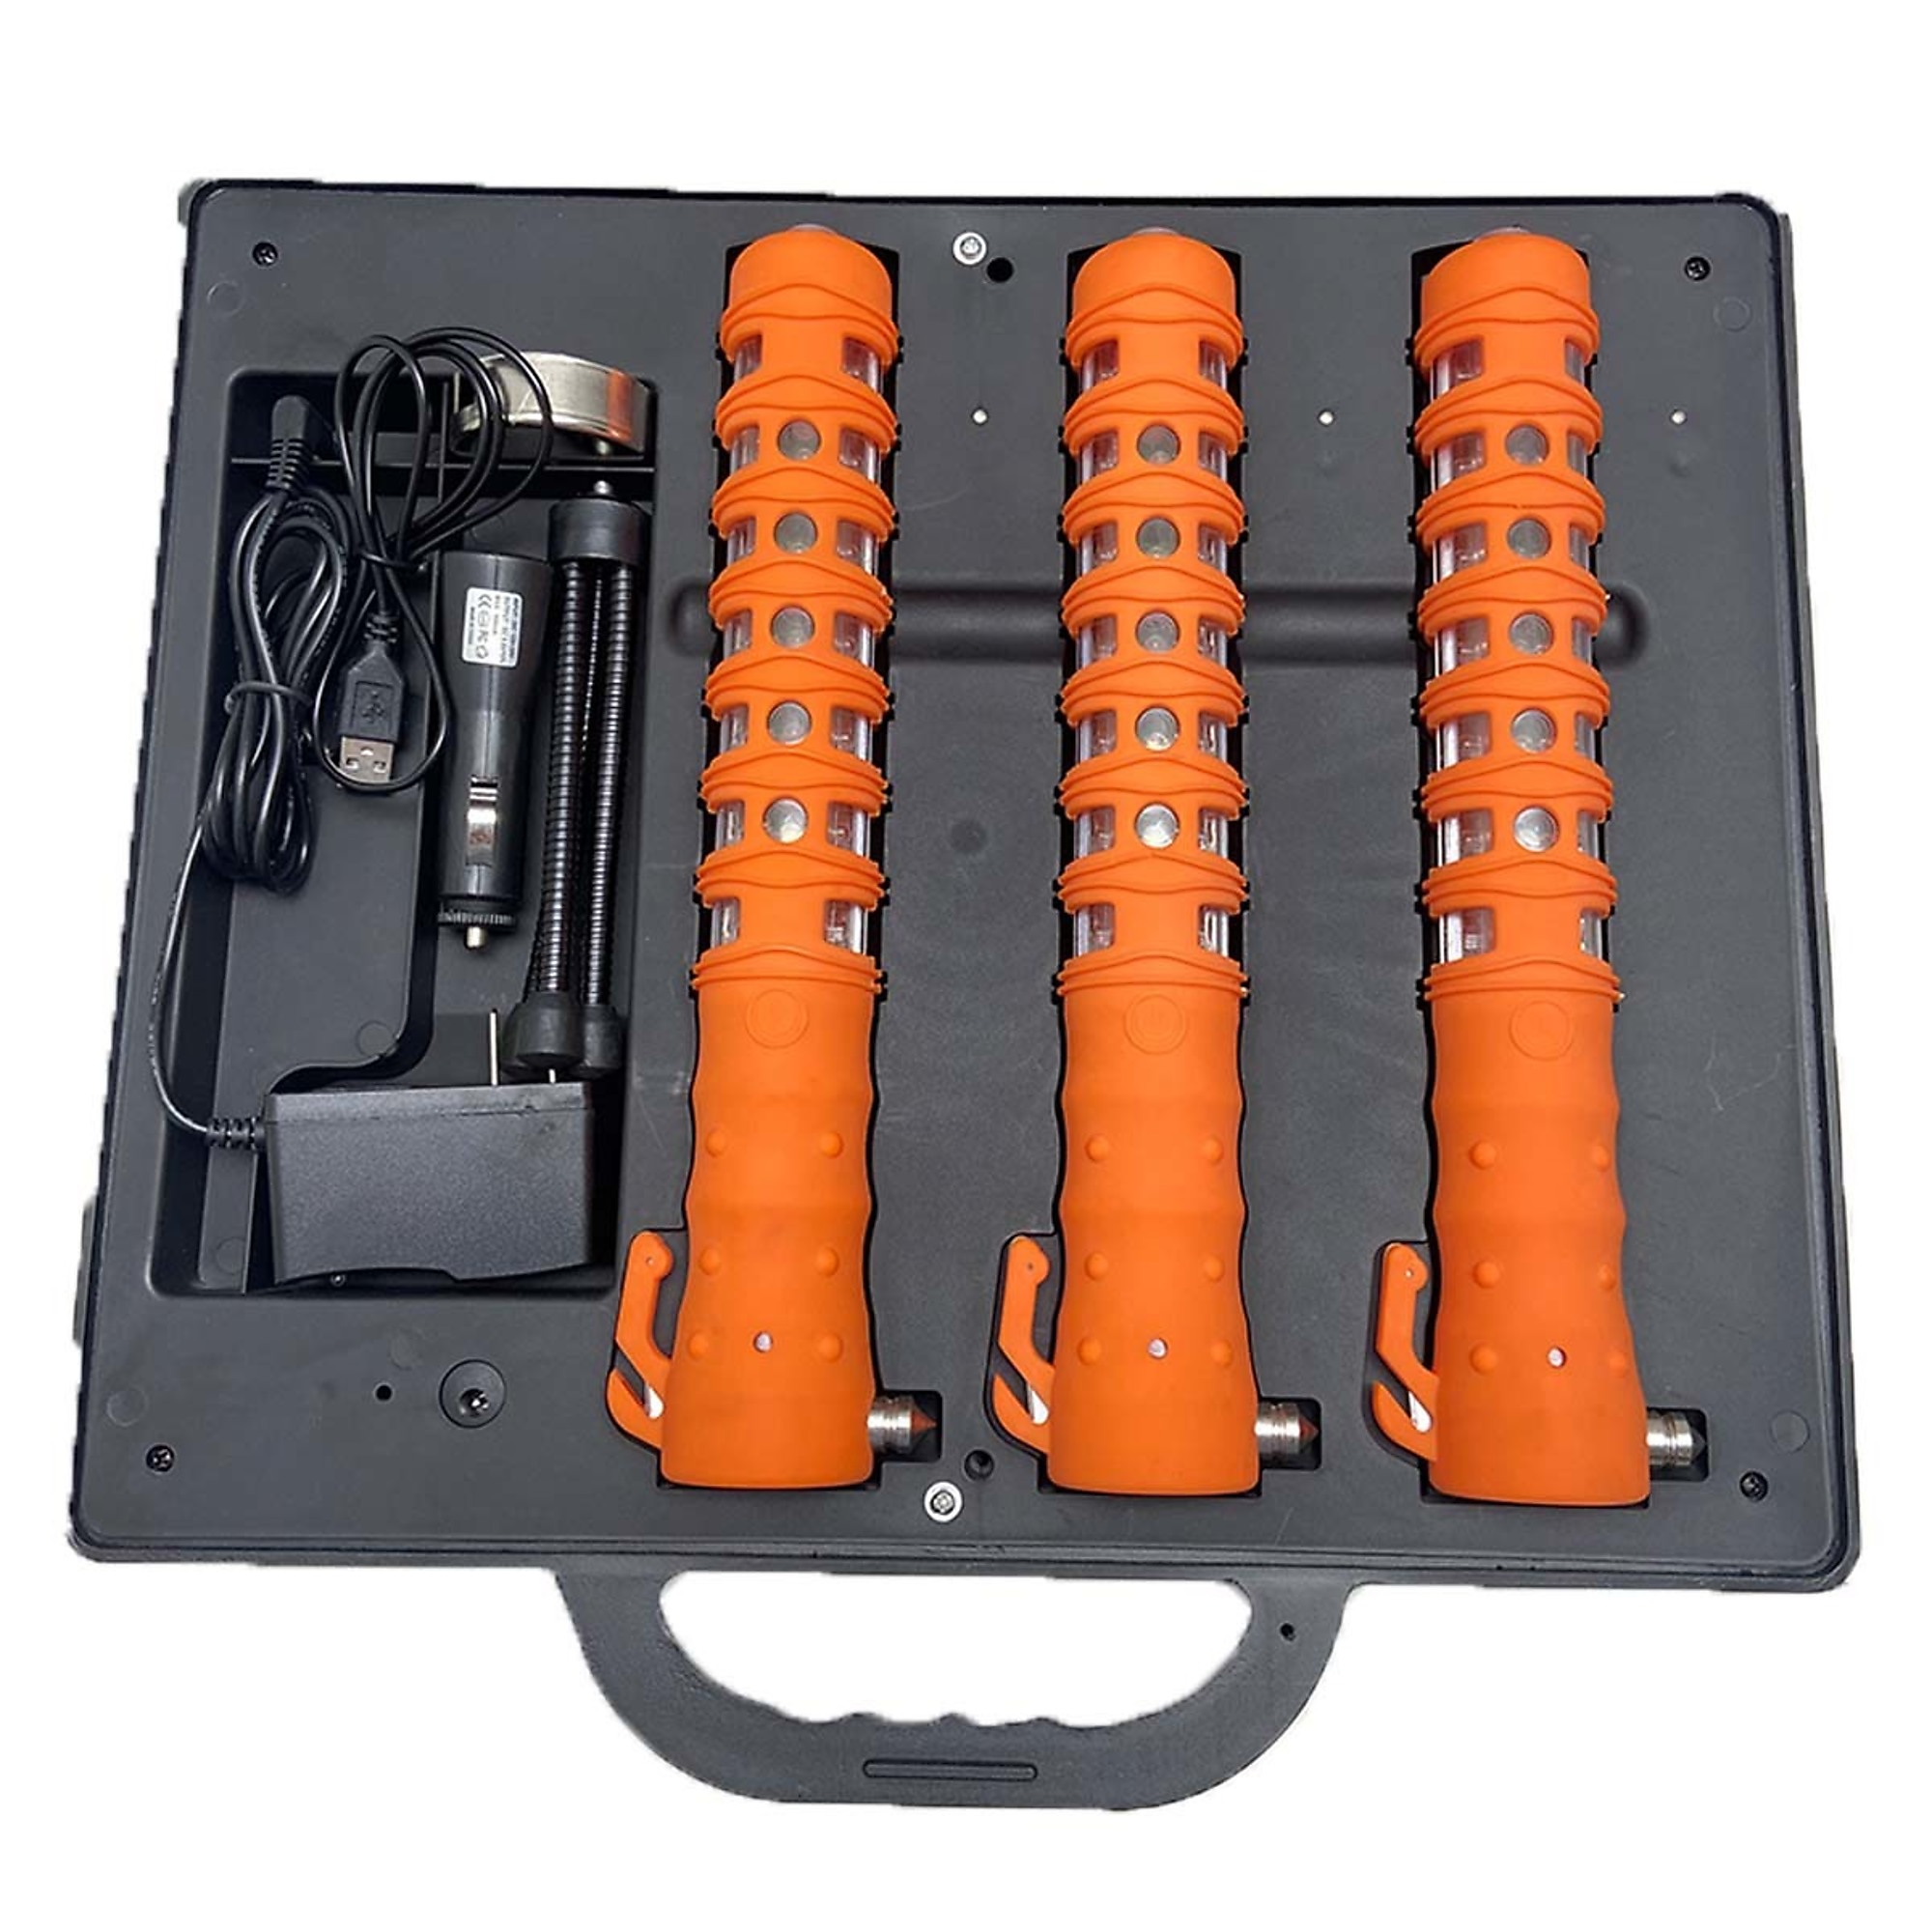 Race Sport Lighting Race Sport Lighting, Amber 3-Baton LED Flare Charging Kit, Case Type Case, Pieces (qty.) 3, Model RS2088R2B-A